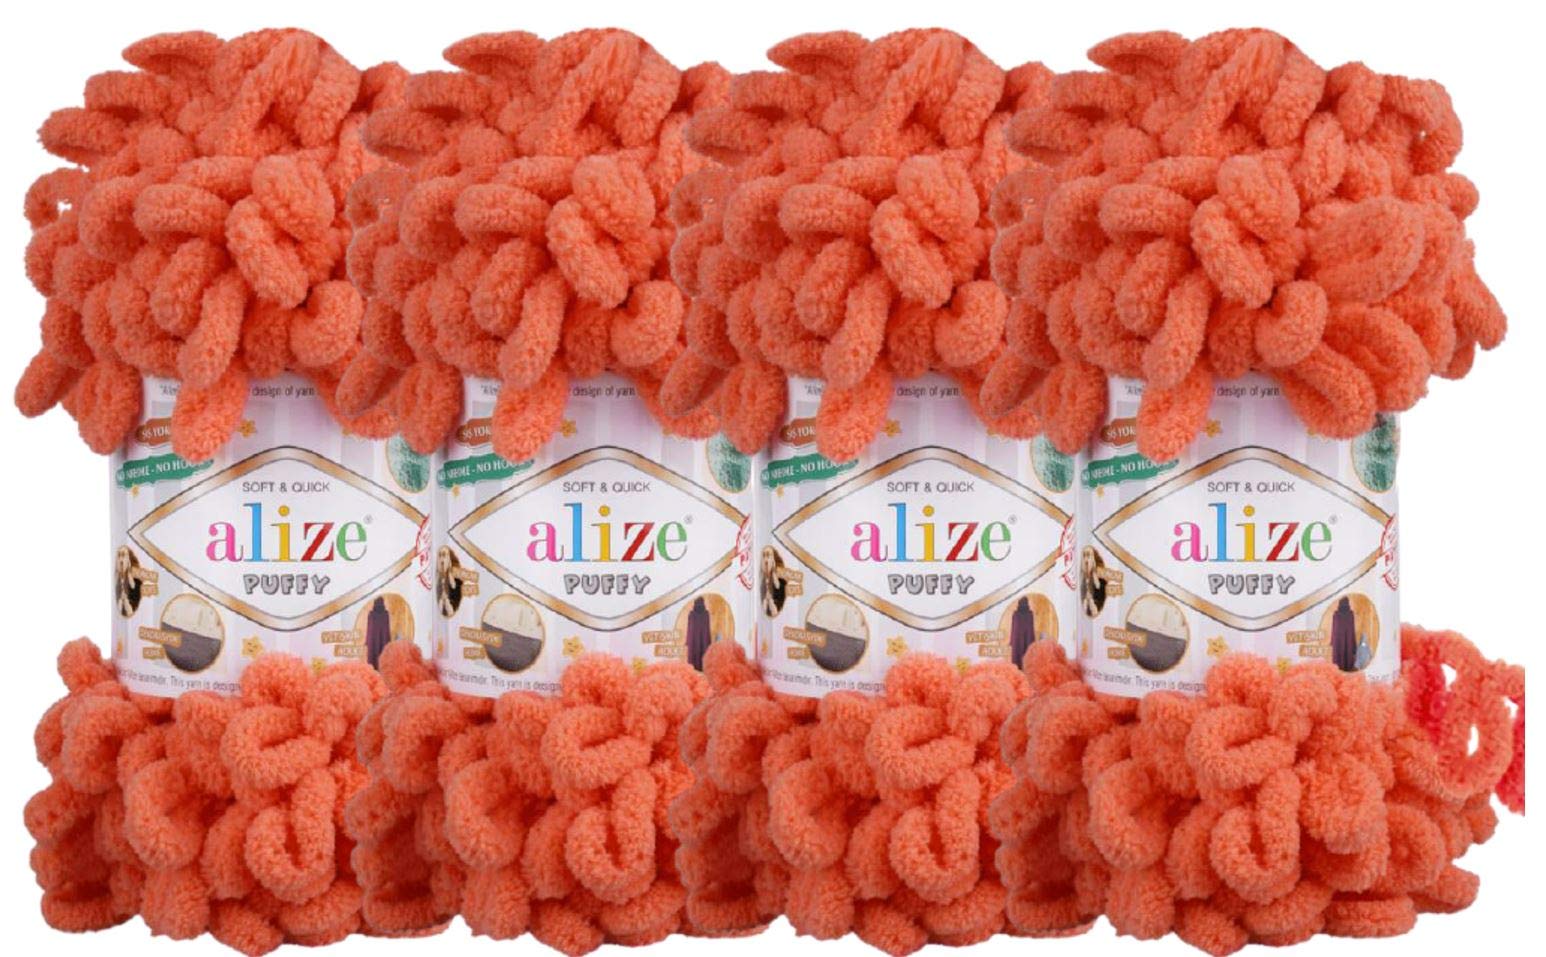 Alize 4 sknBall Alize Puffy Baby Big Loop Blanket Yarn 100% Micropolyester Soft Yarn 400gr 393 yds (619-coral)